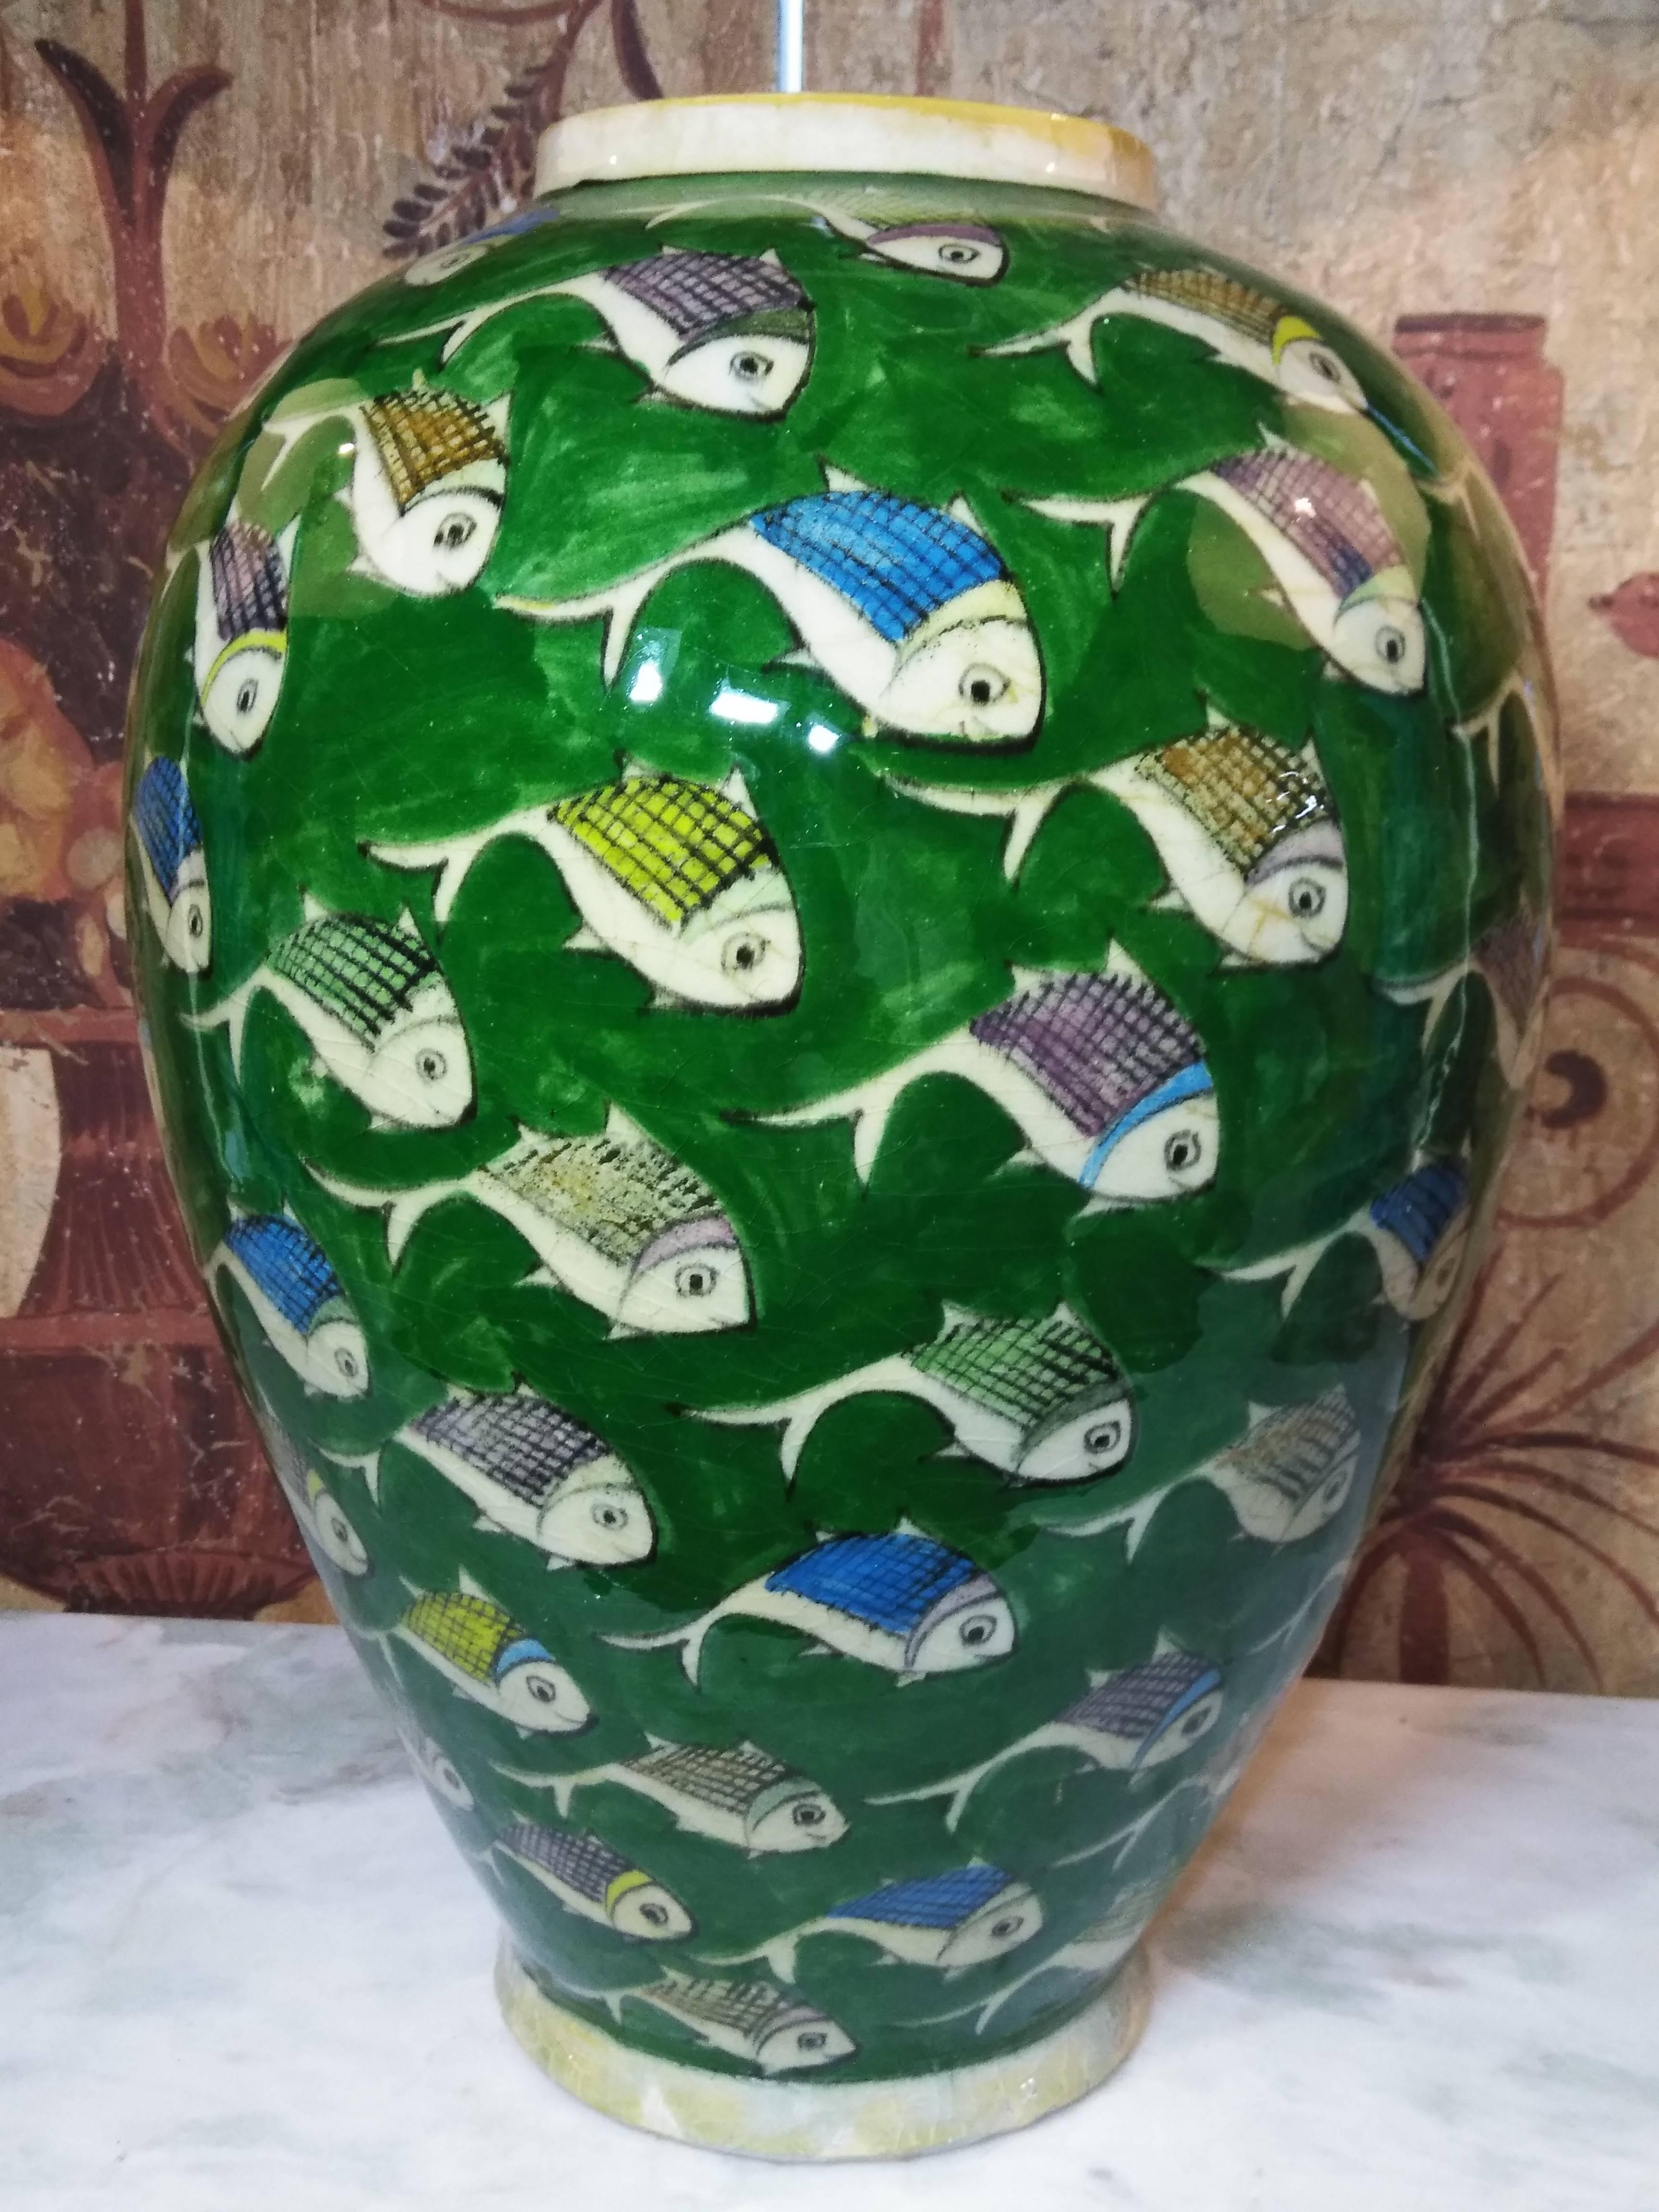 Beautiful vintage green Persian ceramic vase with hand-painted colorful fish motif surrounding it. Great decorative piece of art for any room.